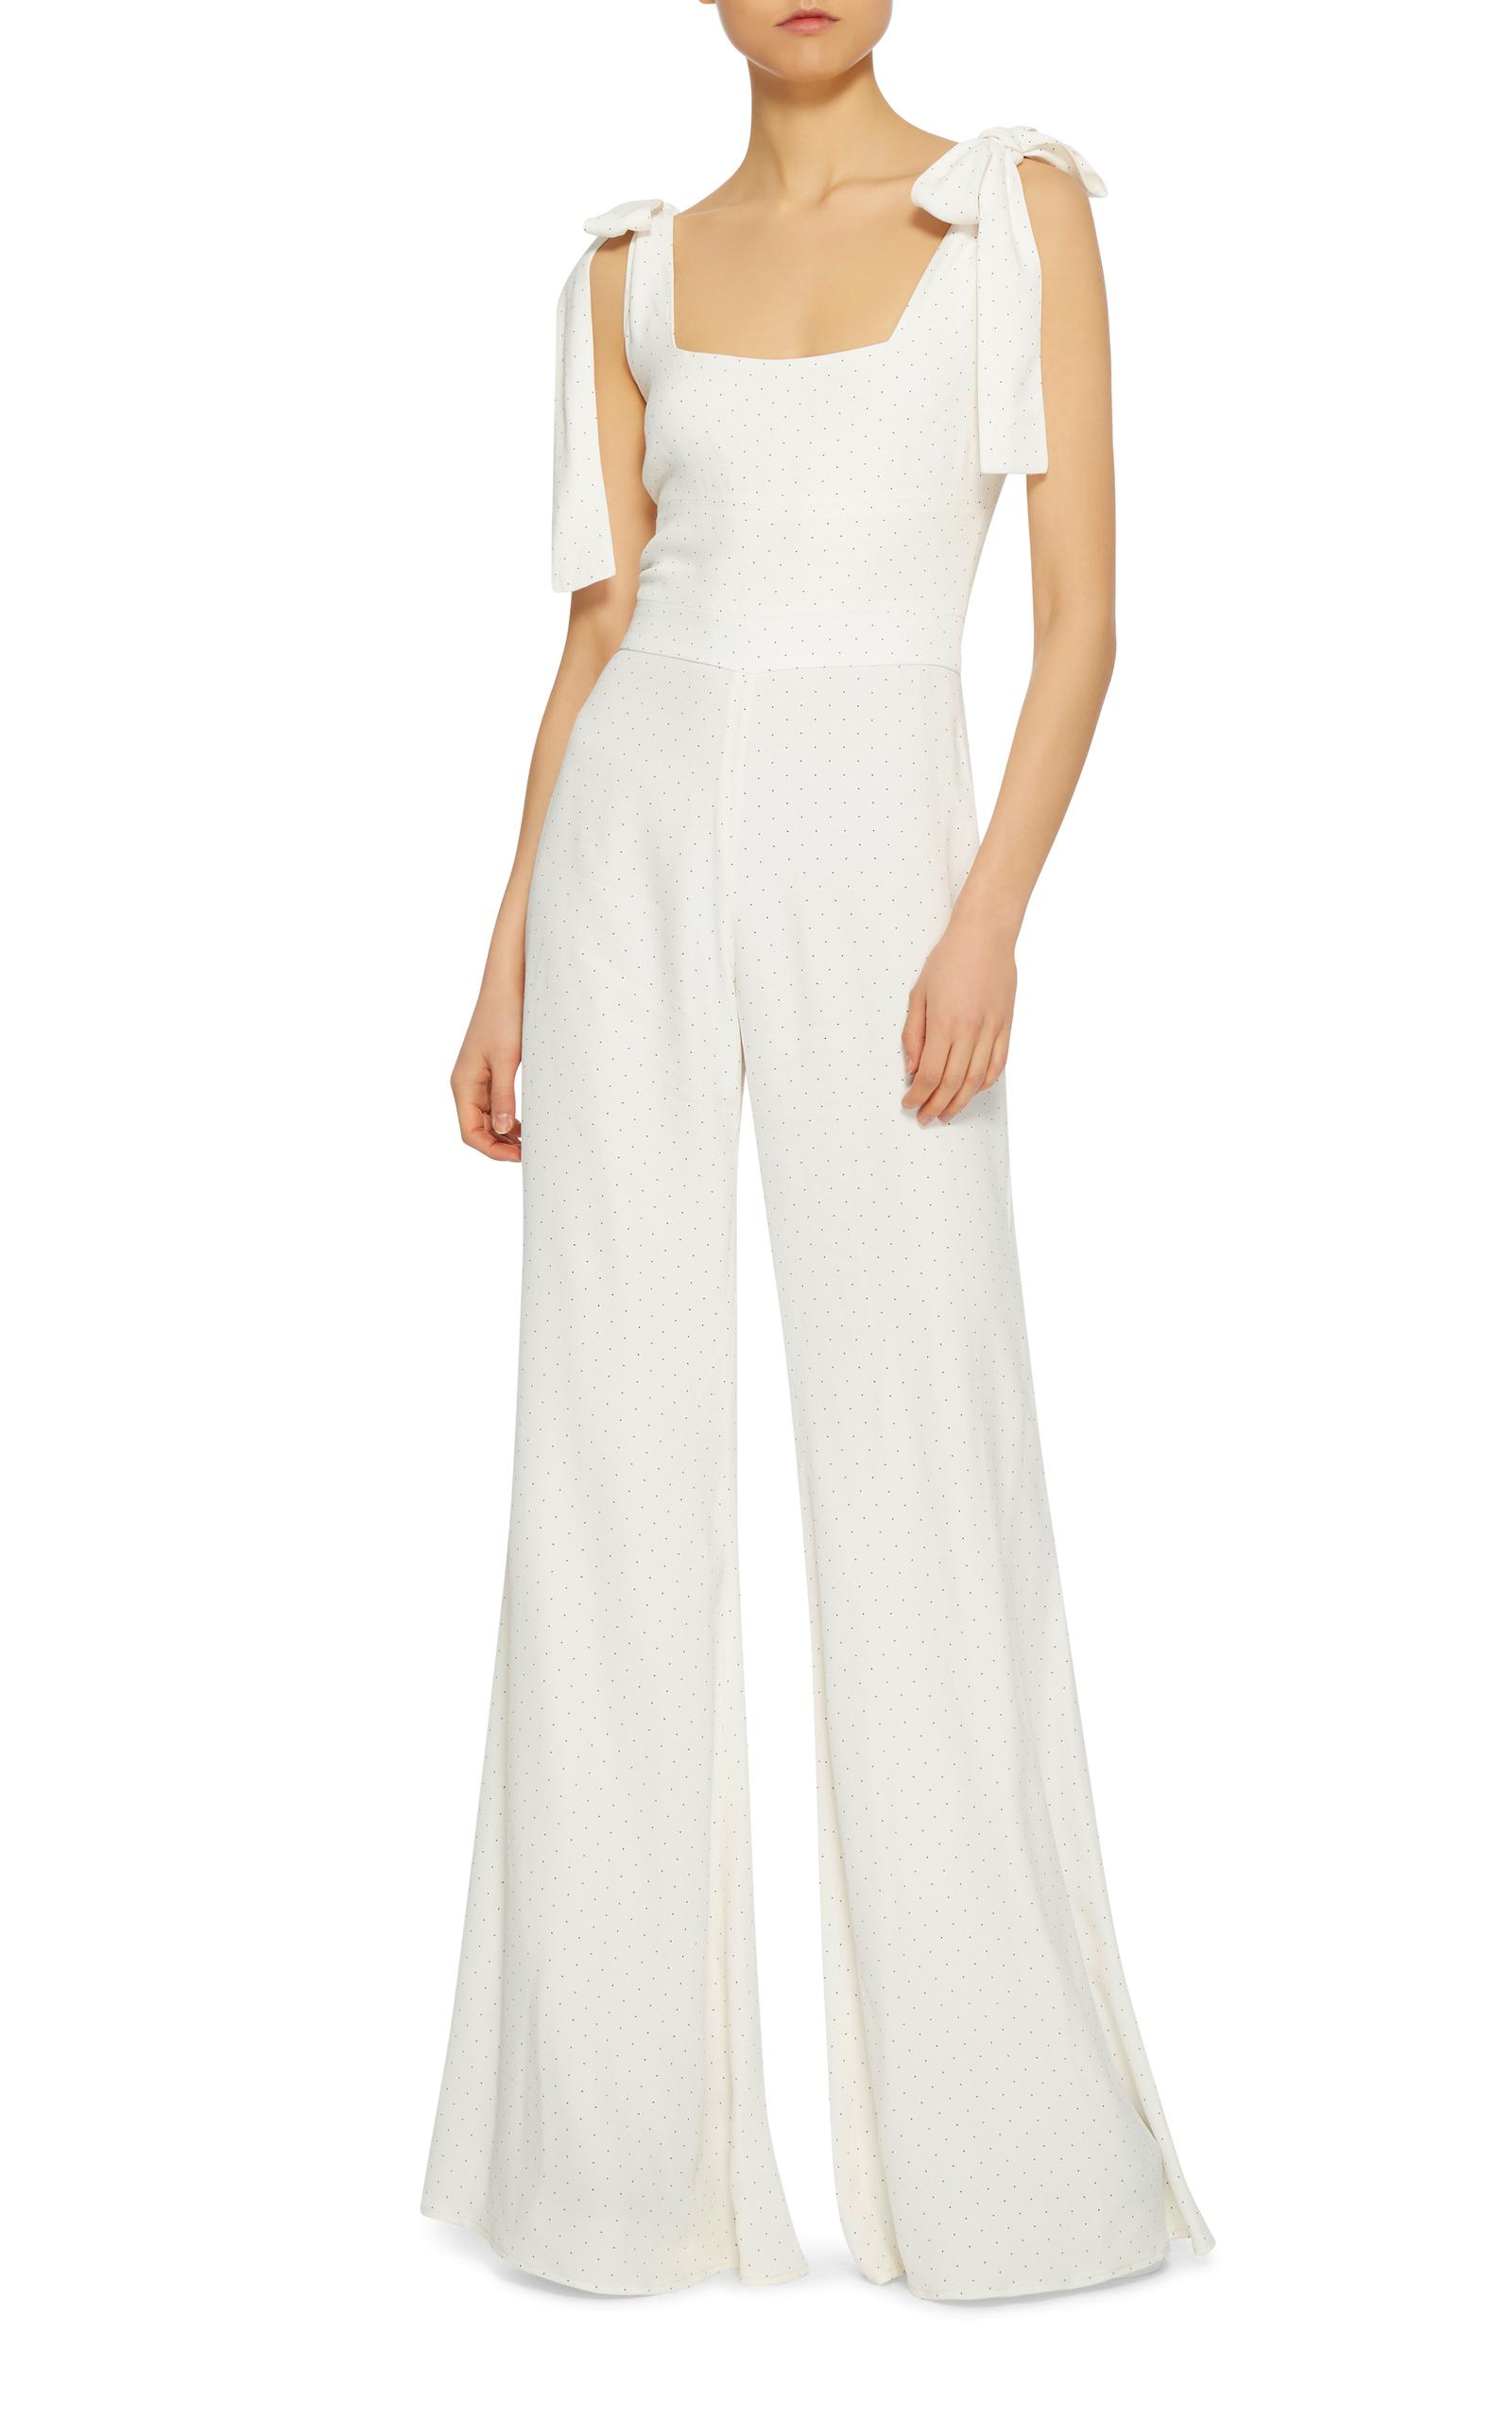 Alexis Synthetic Lincoln Bow Jumpsuit in White - Lyst